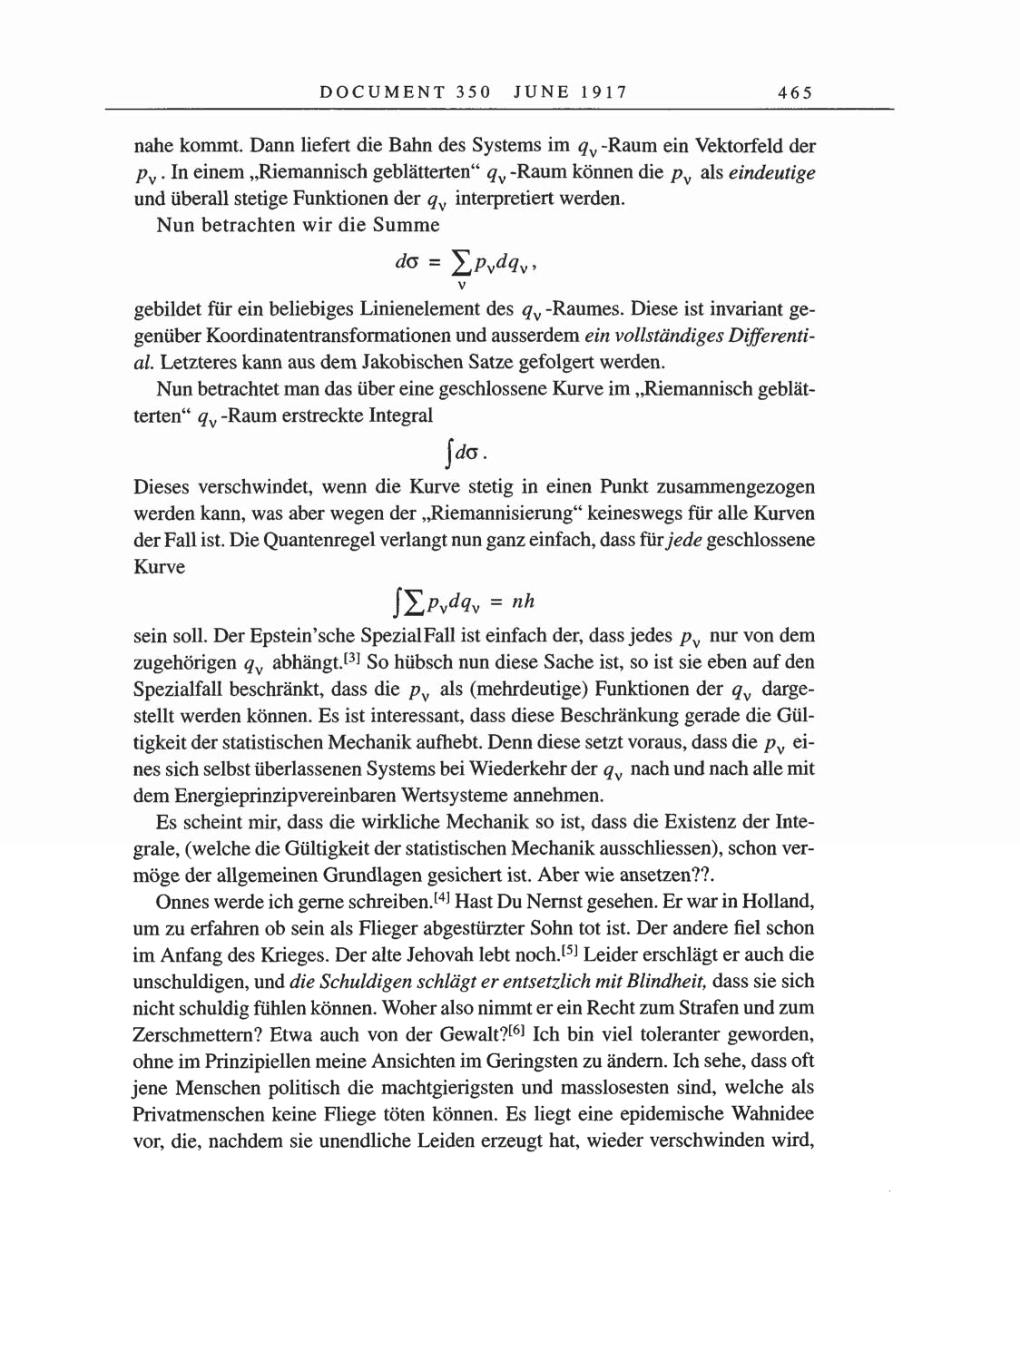 Volume 8, Part A: The Berlin Years: Correspondence 1914-1917 page 465